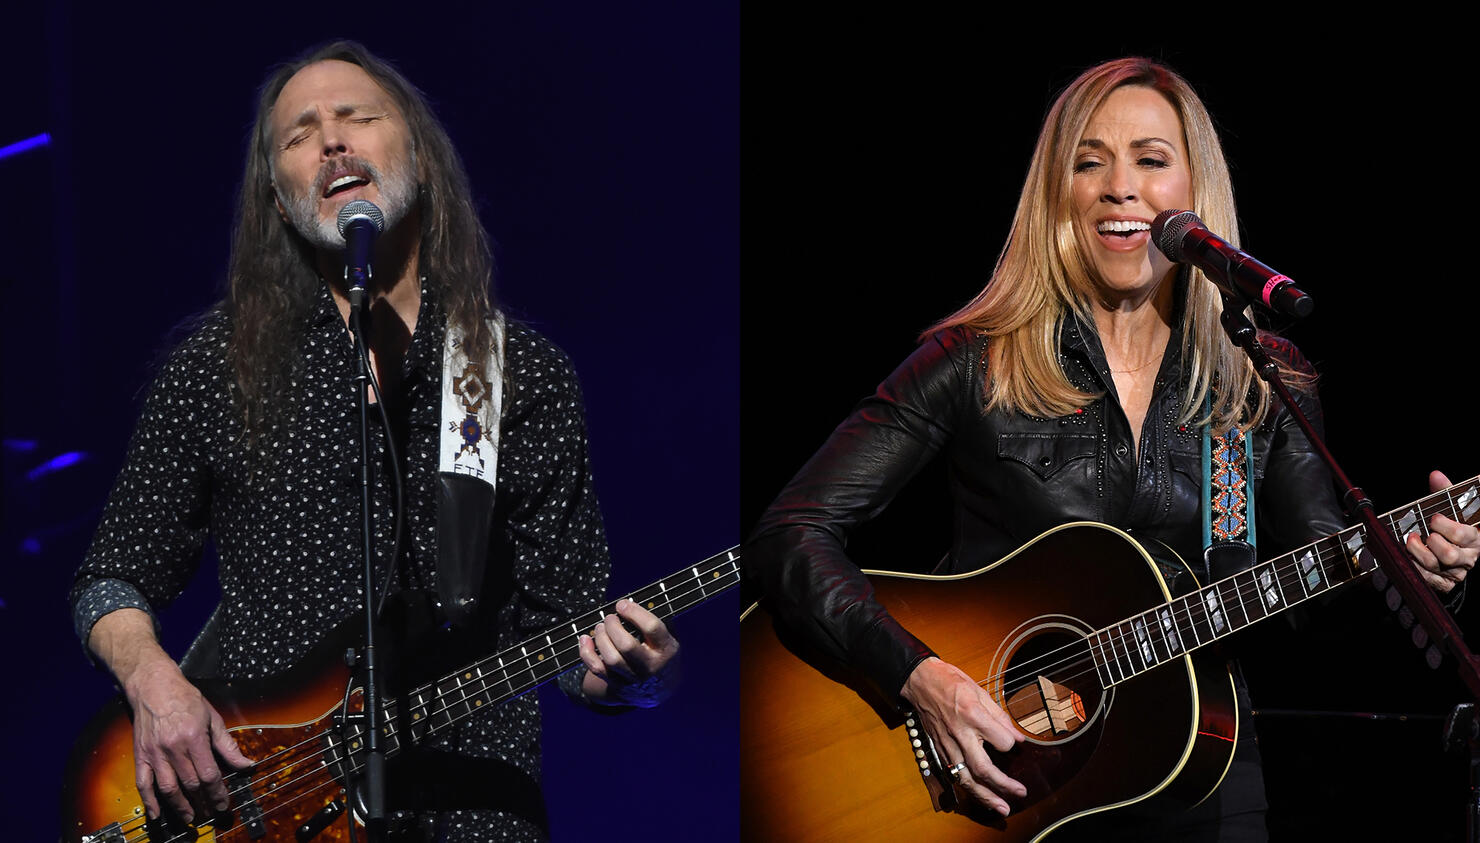 Timothy B. Schmit On Going Solo, The Eagles And His Life In Music